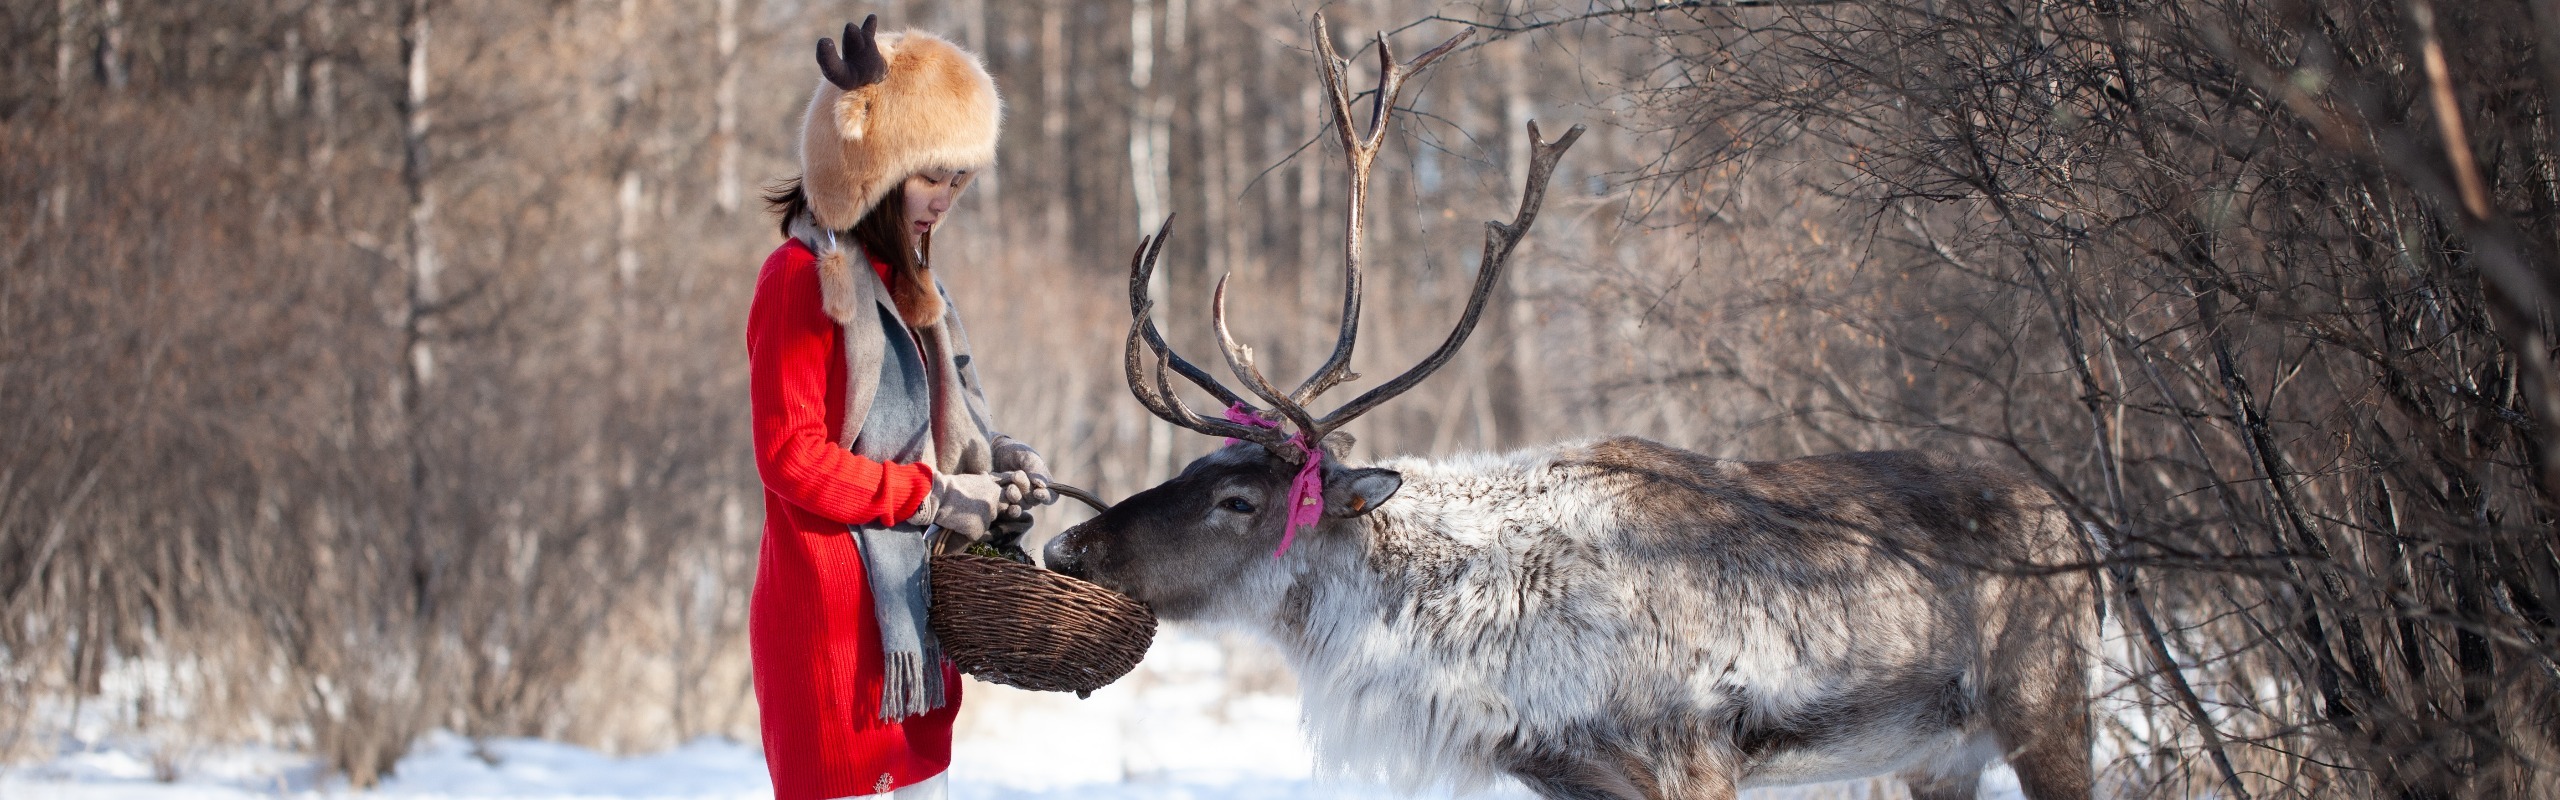 Inner Mongolia Mini Group| 6-Day Winter Tour with Reindeer Experience (6-12 People)